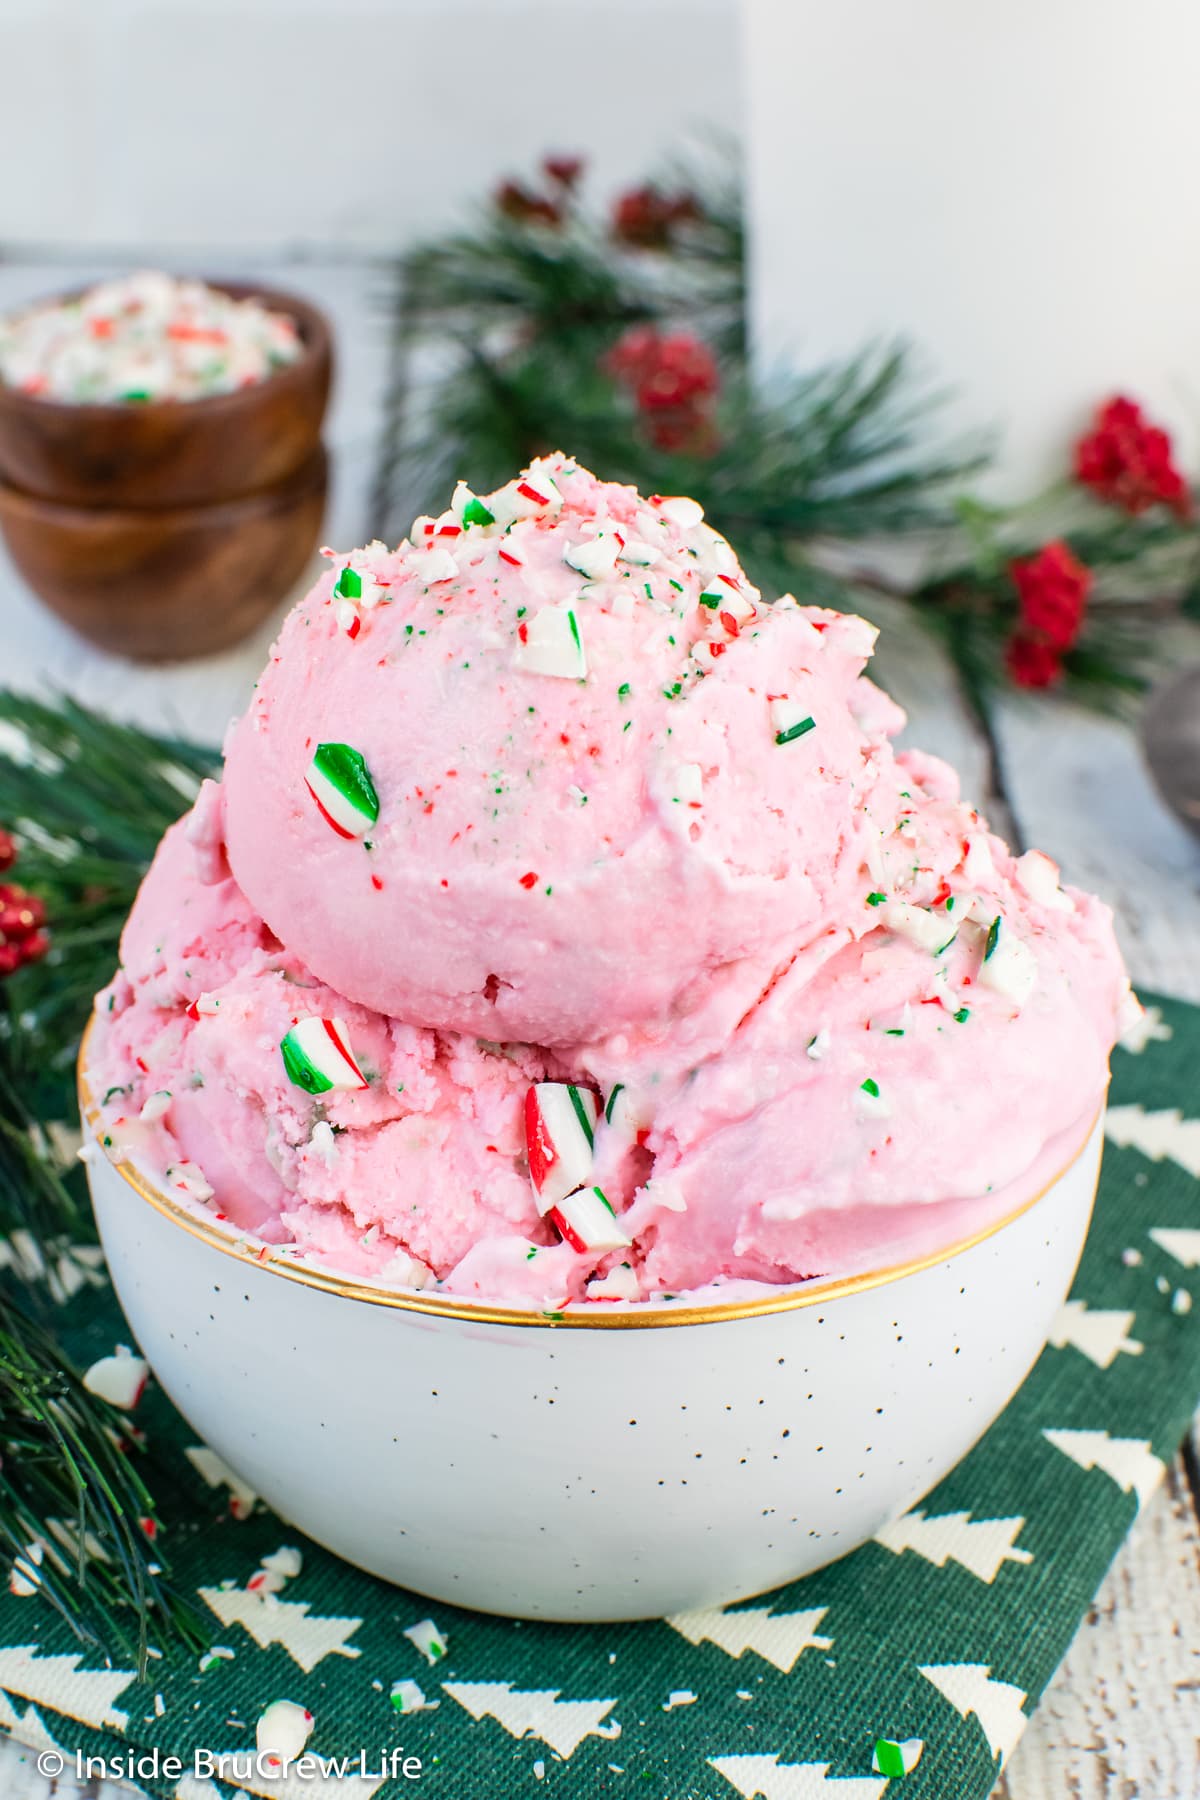 Pink ice cream in a bowl.